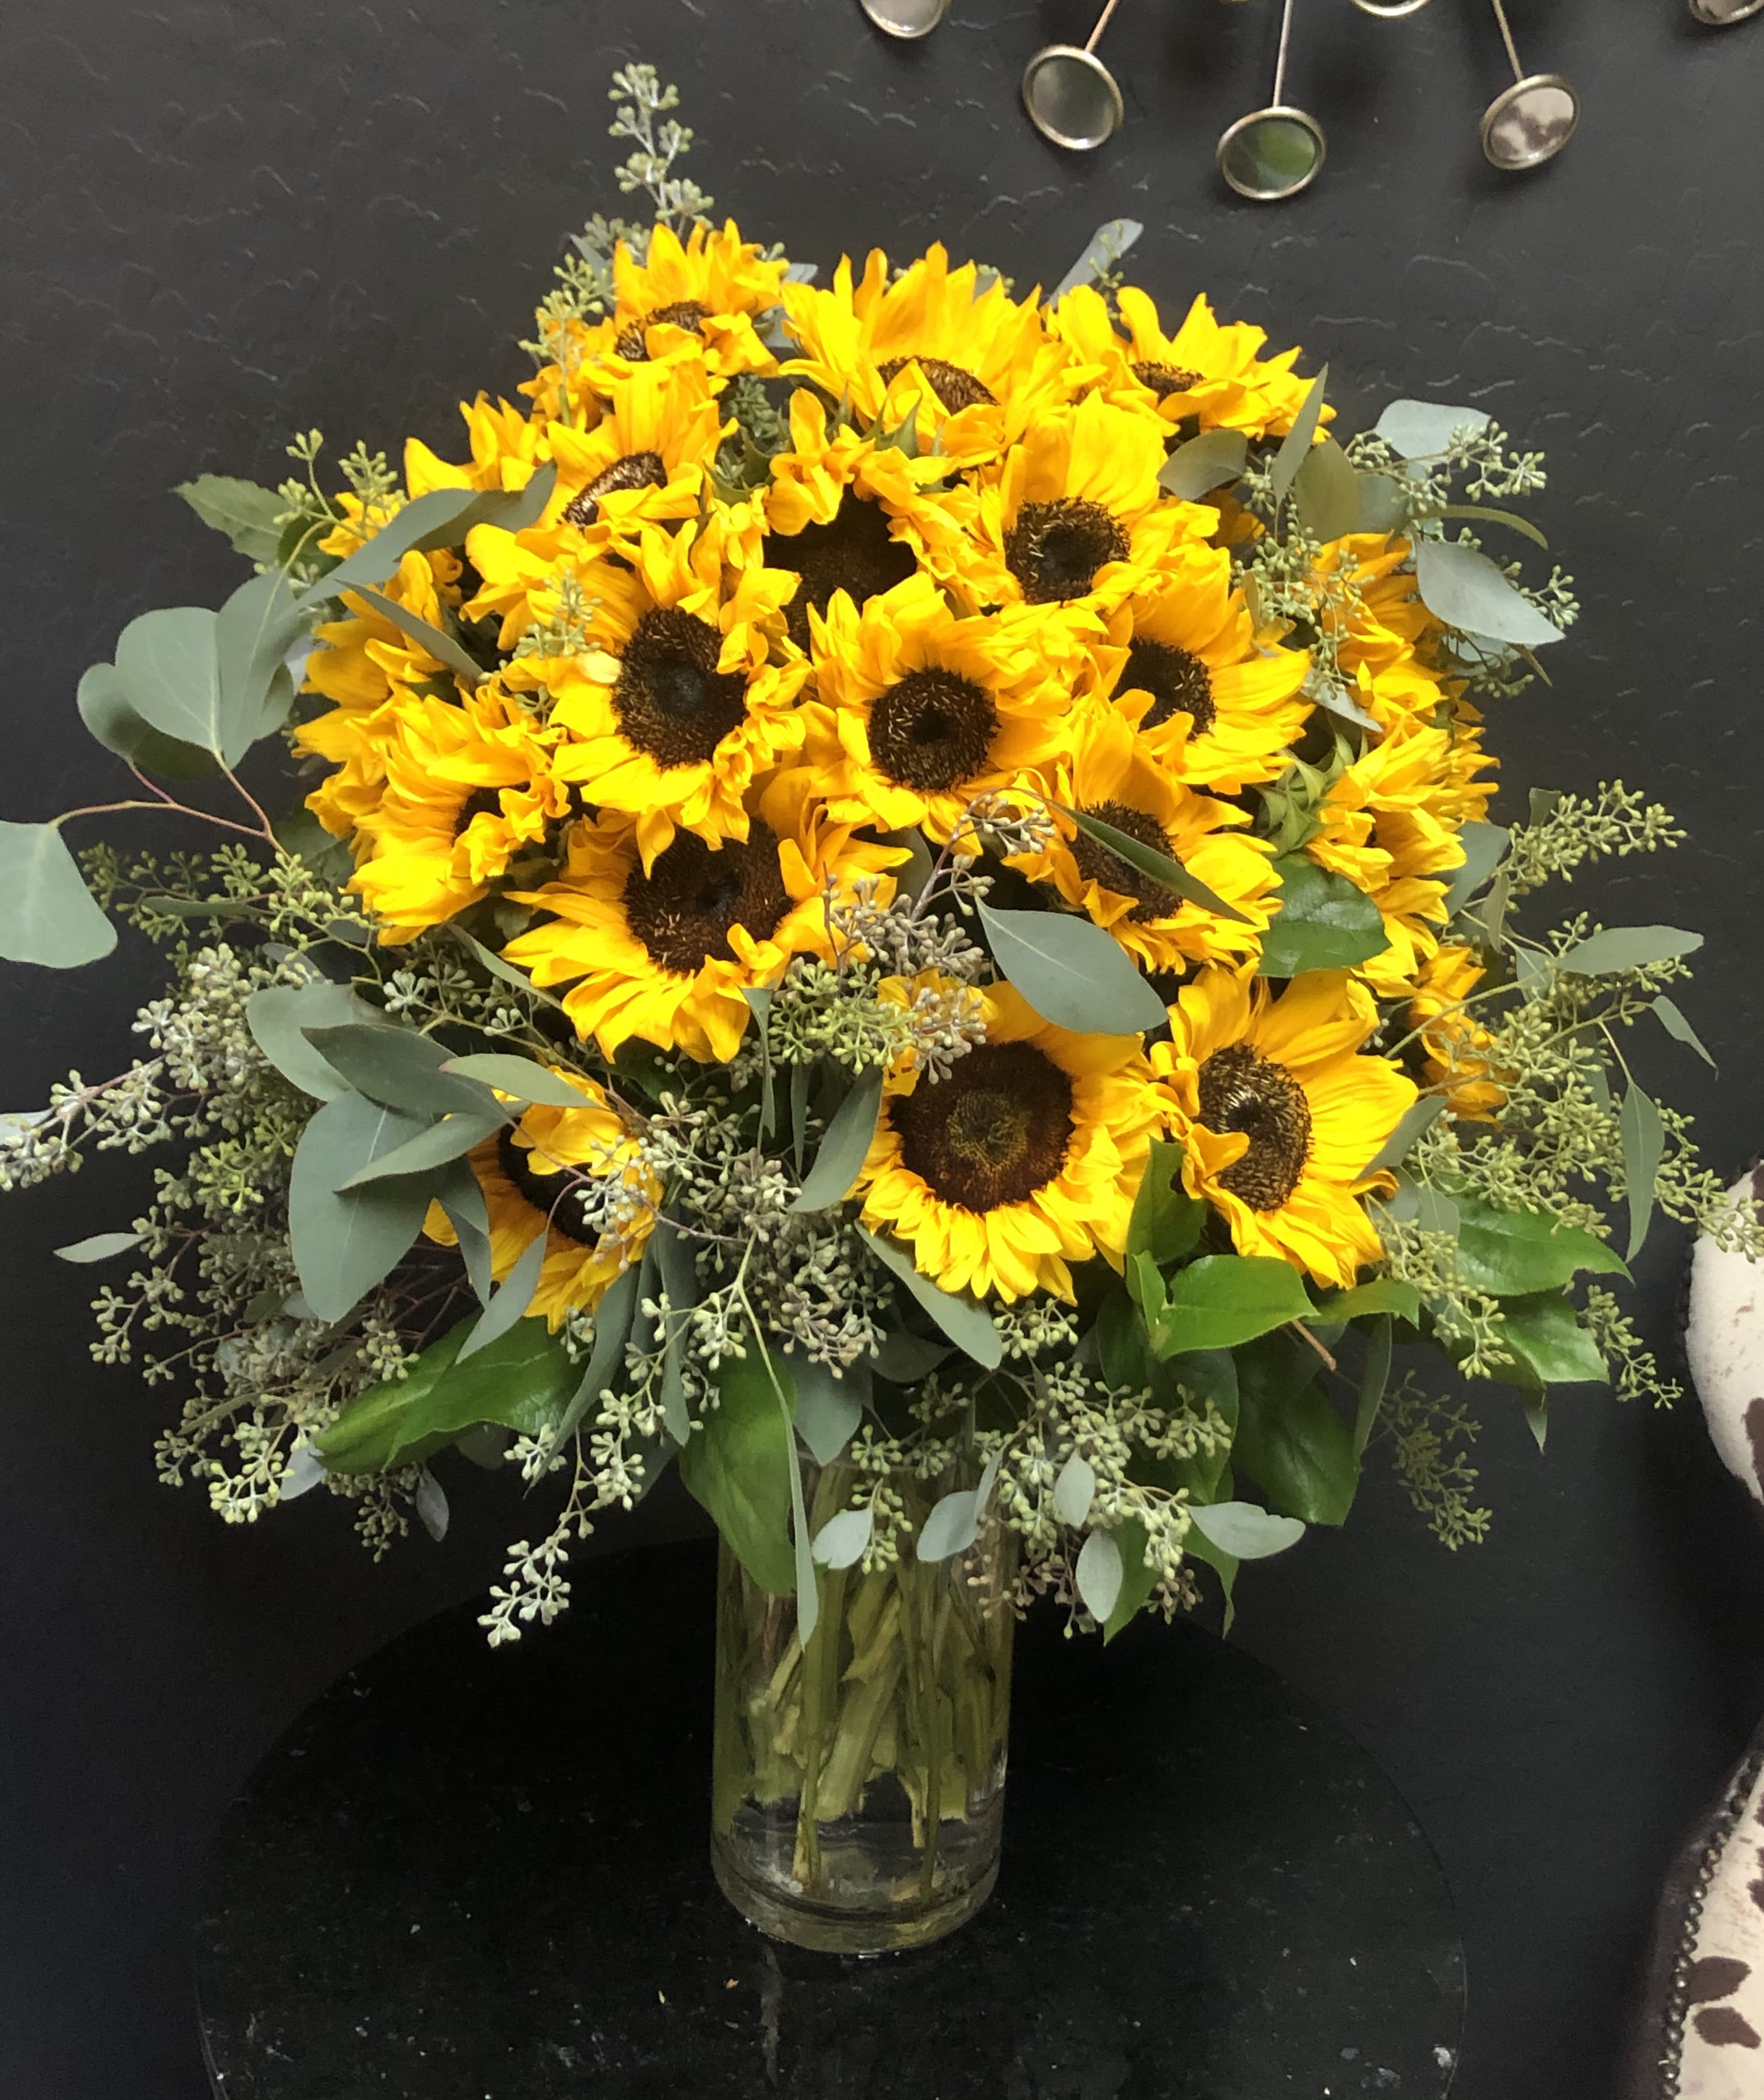 Luxury Sunflower Bouquet - Luxury Sunflower Bouquet features sunflowers and seeded eucalyptus in an elegant display. Shown in Premium Size